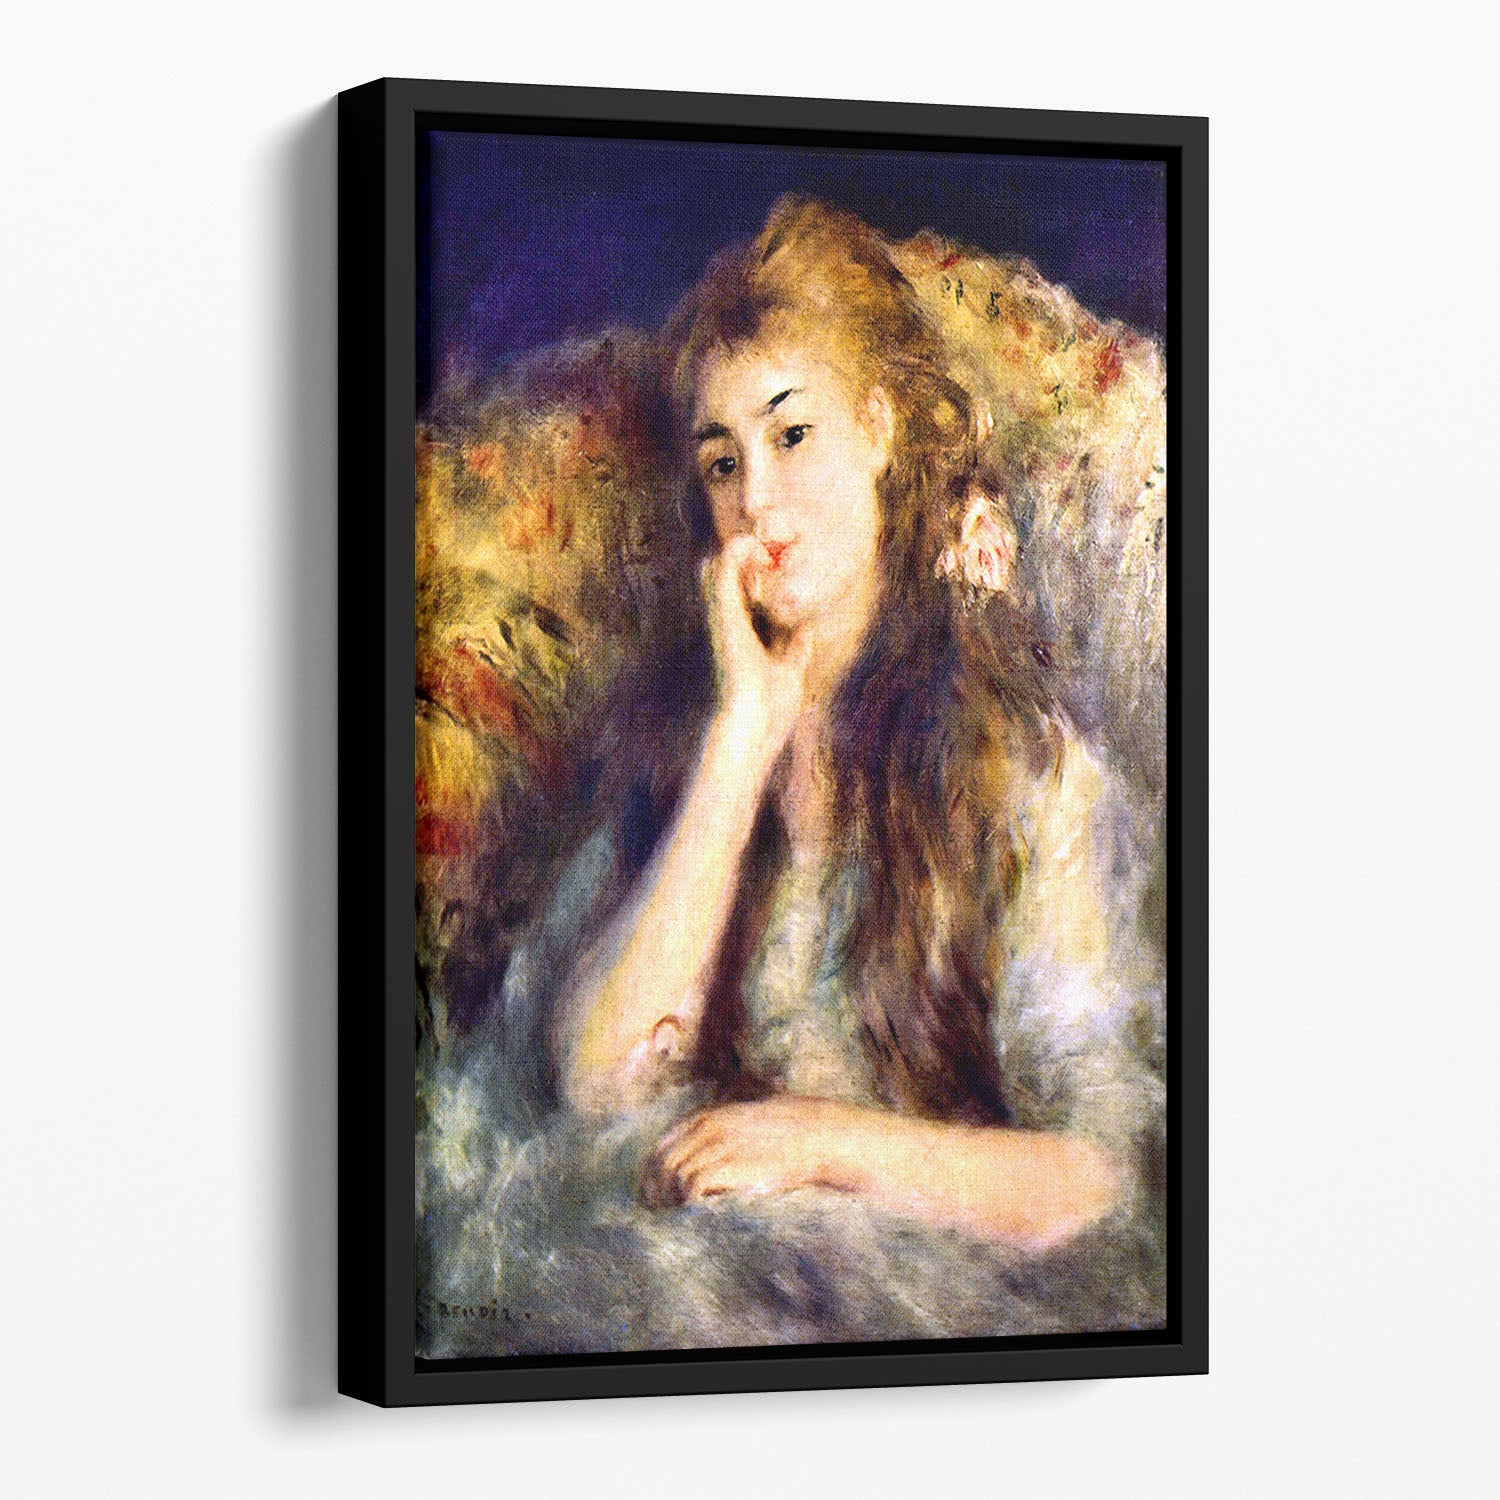 Portrait of a girl in thoughts by Renoir Floating Framed Canvas